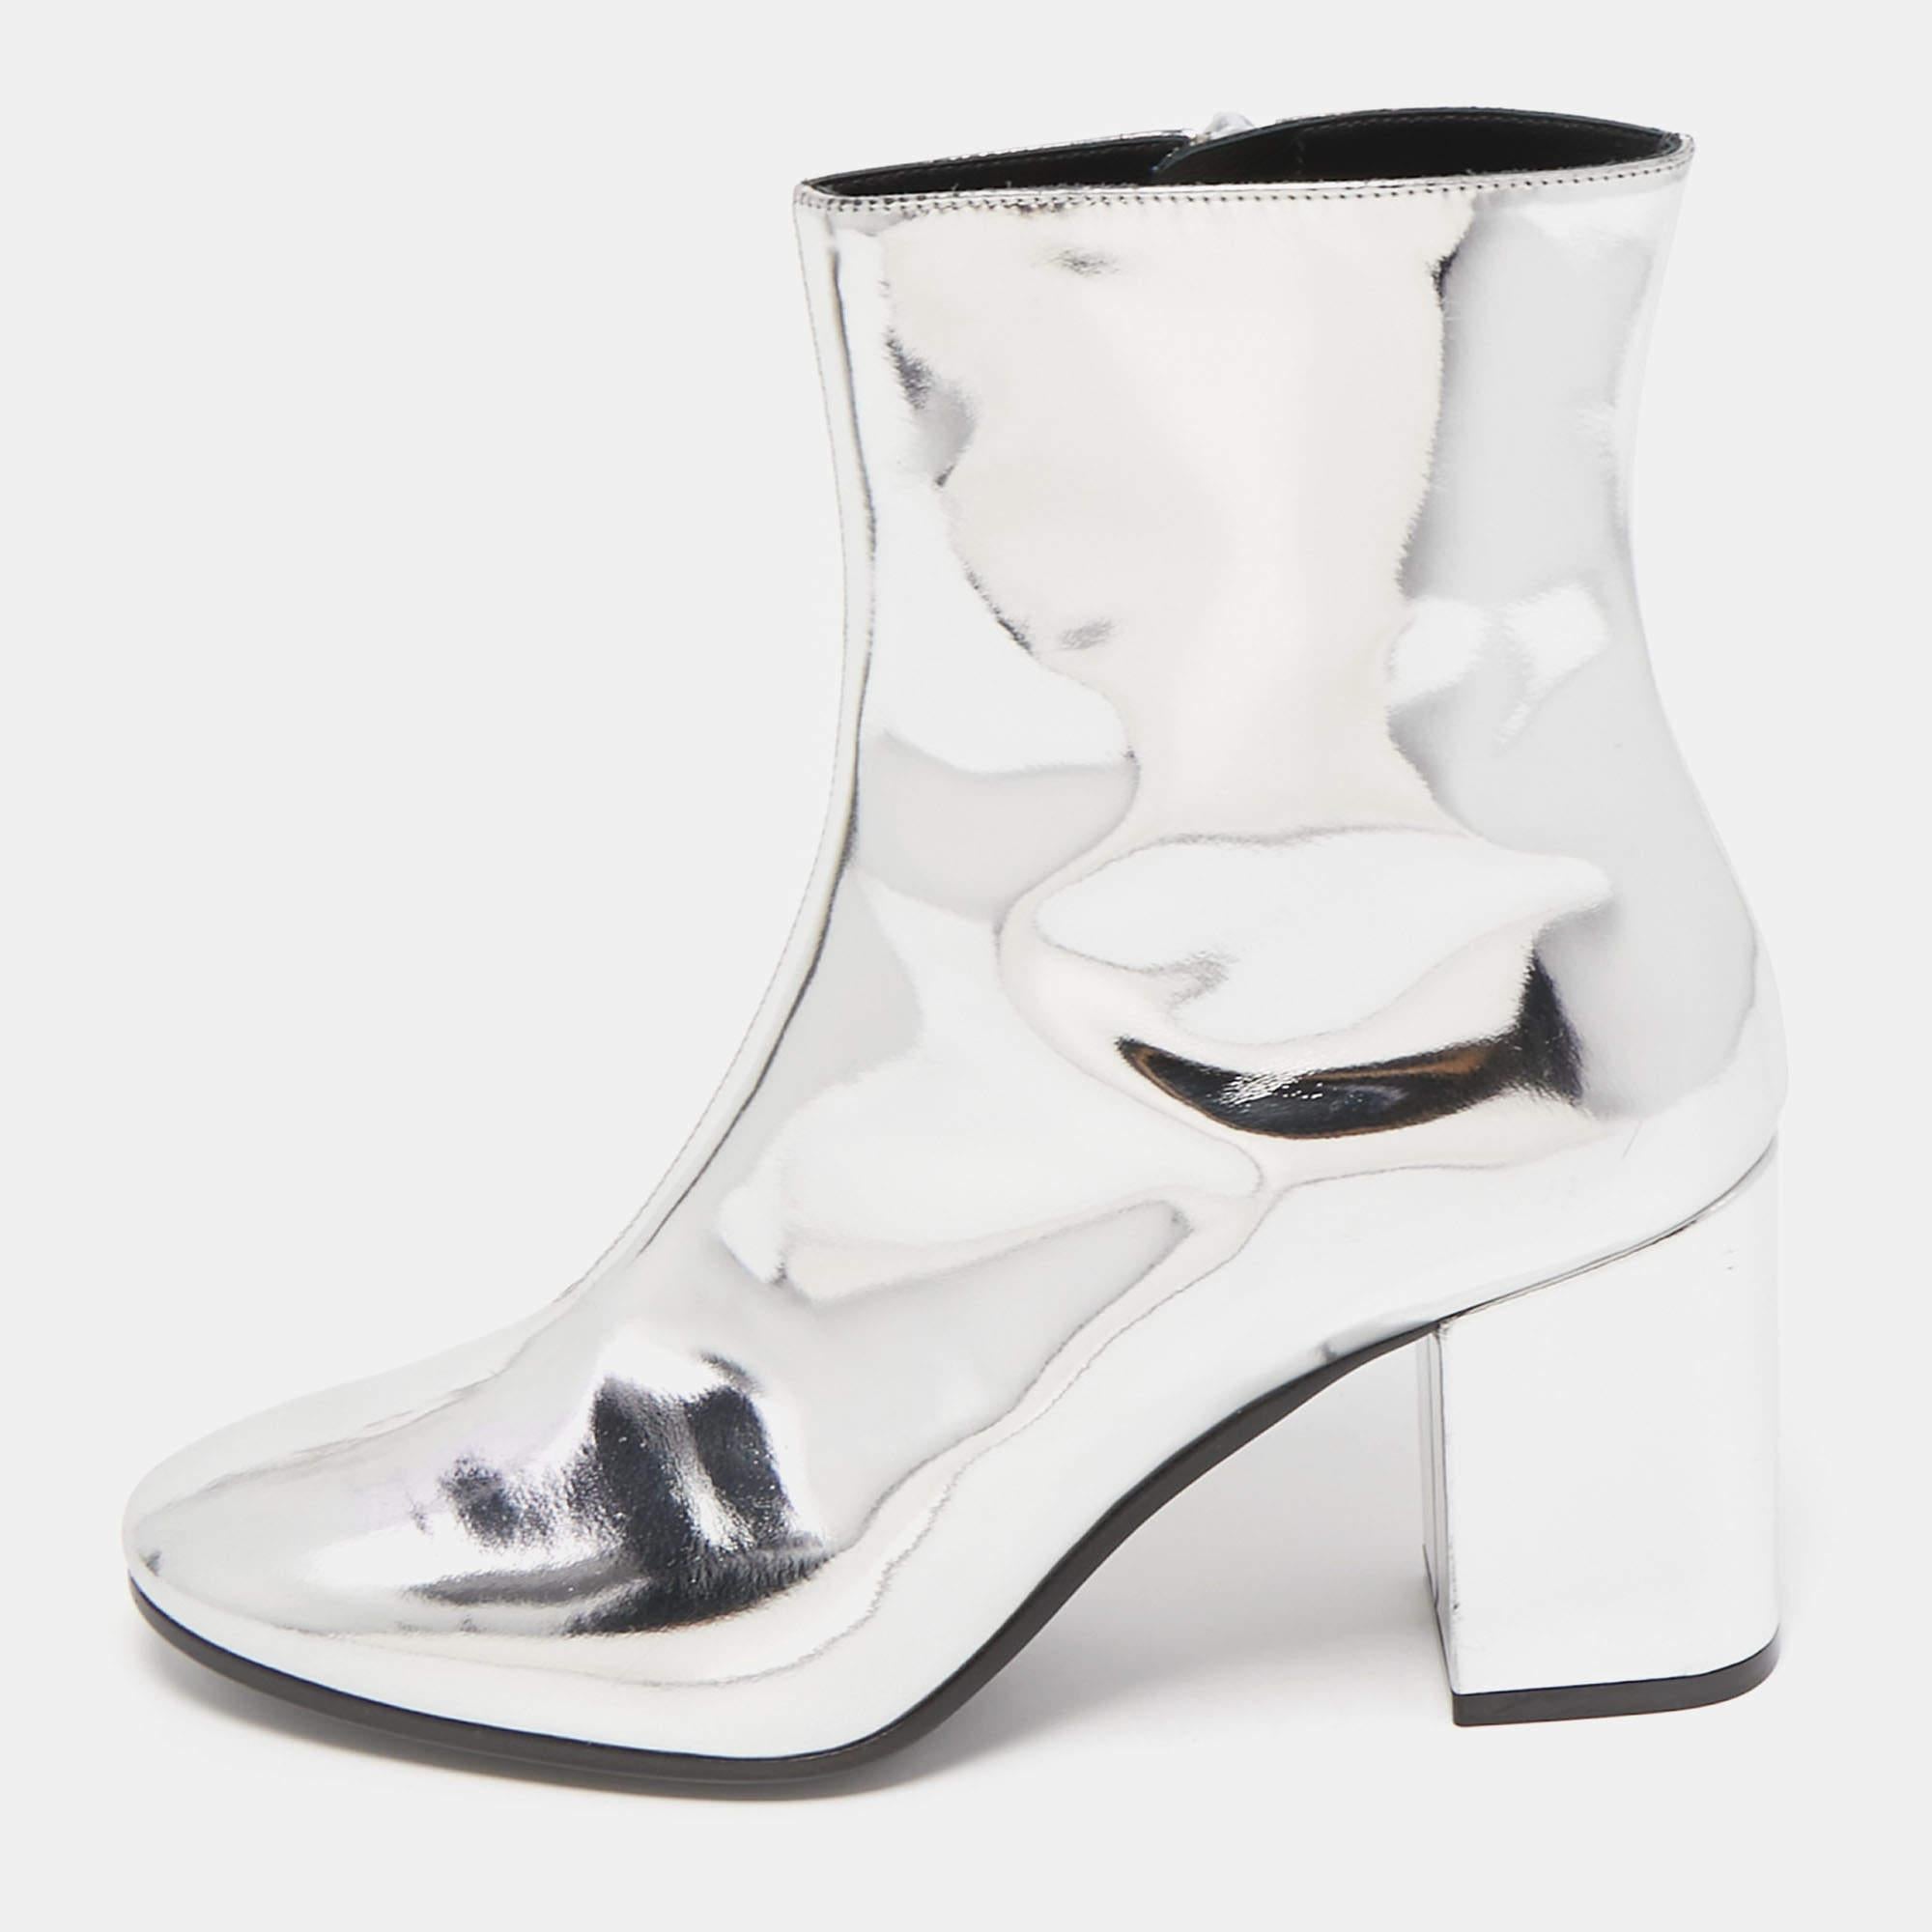 Balenciaga Silver Foil Leather Block Heel Ankle Boots Size 36 2